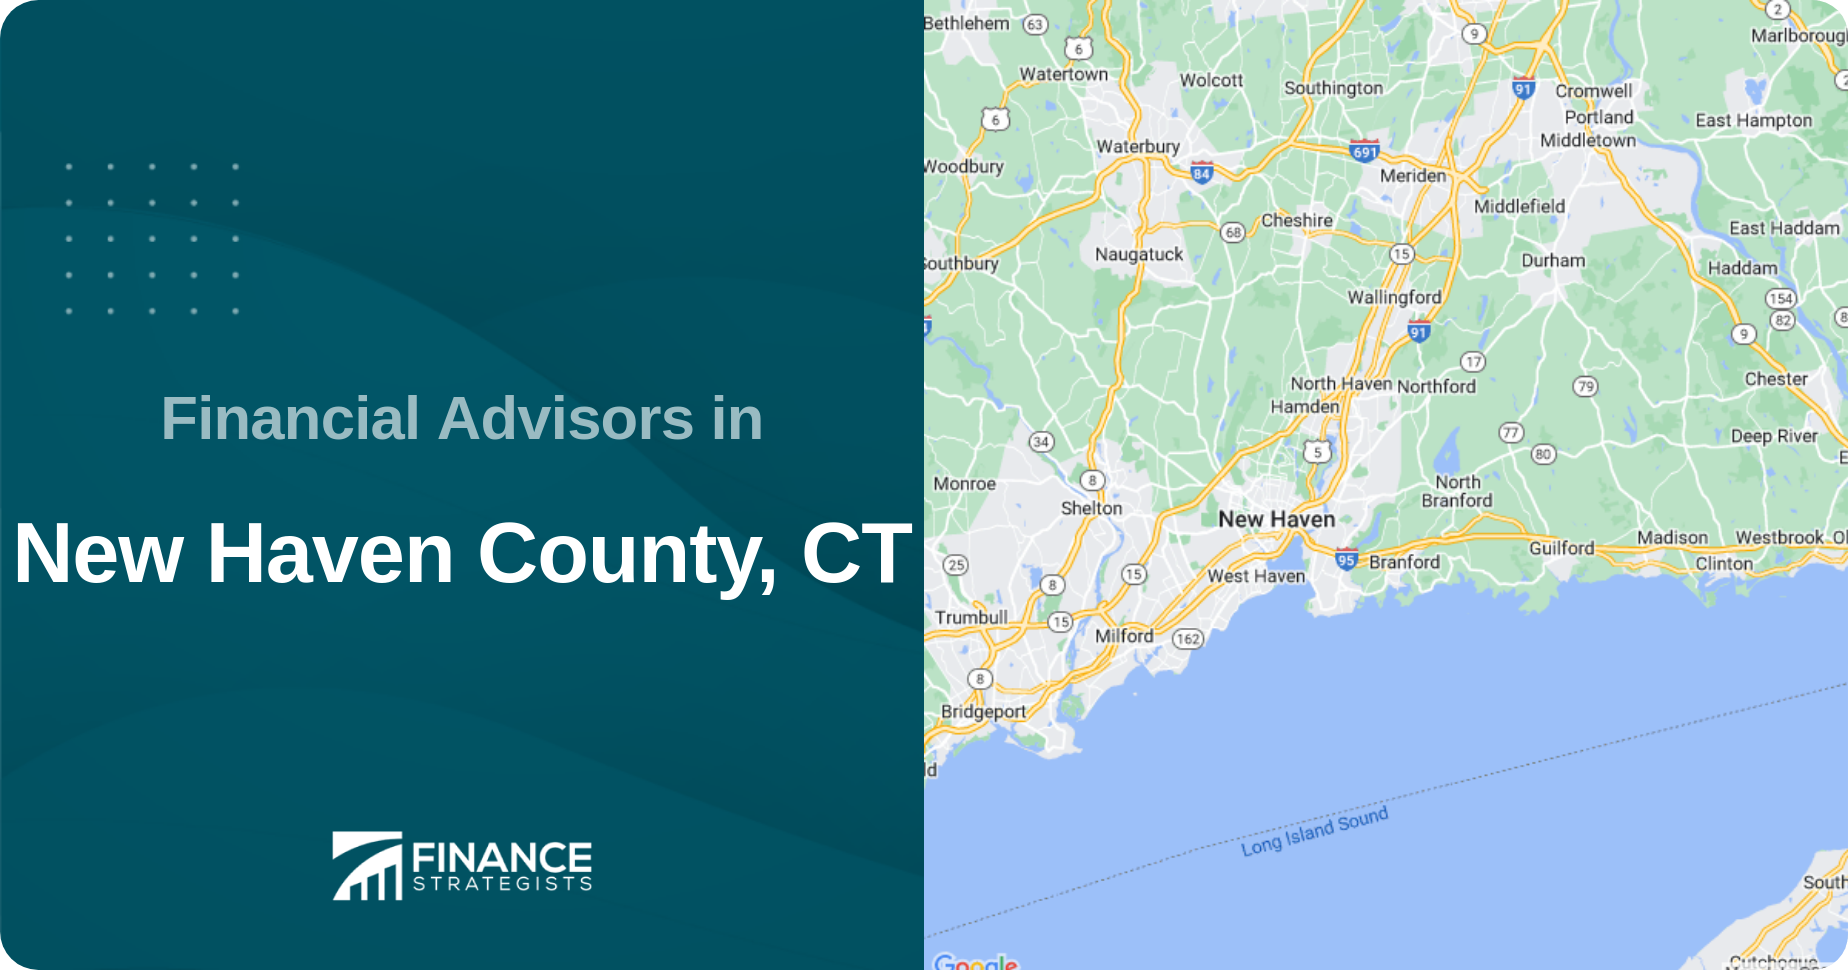 Financial Advisors in New Haven County, CT